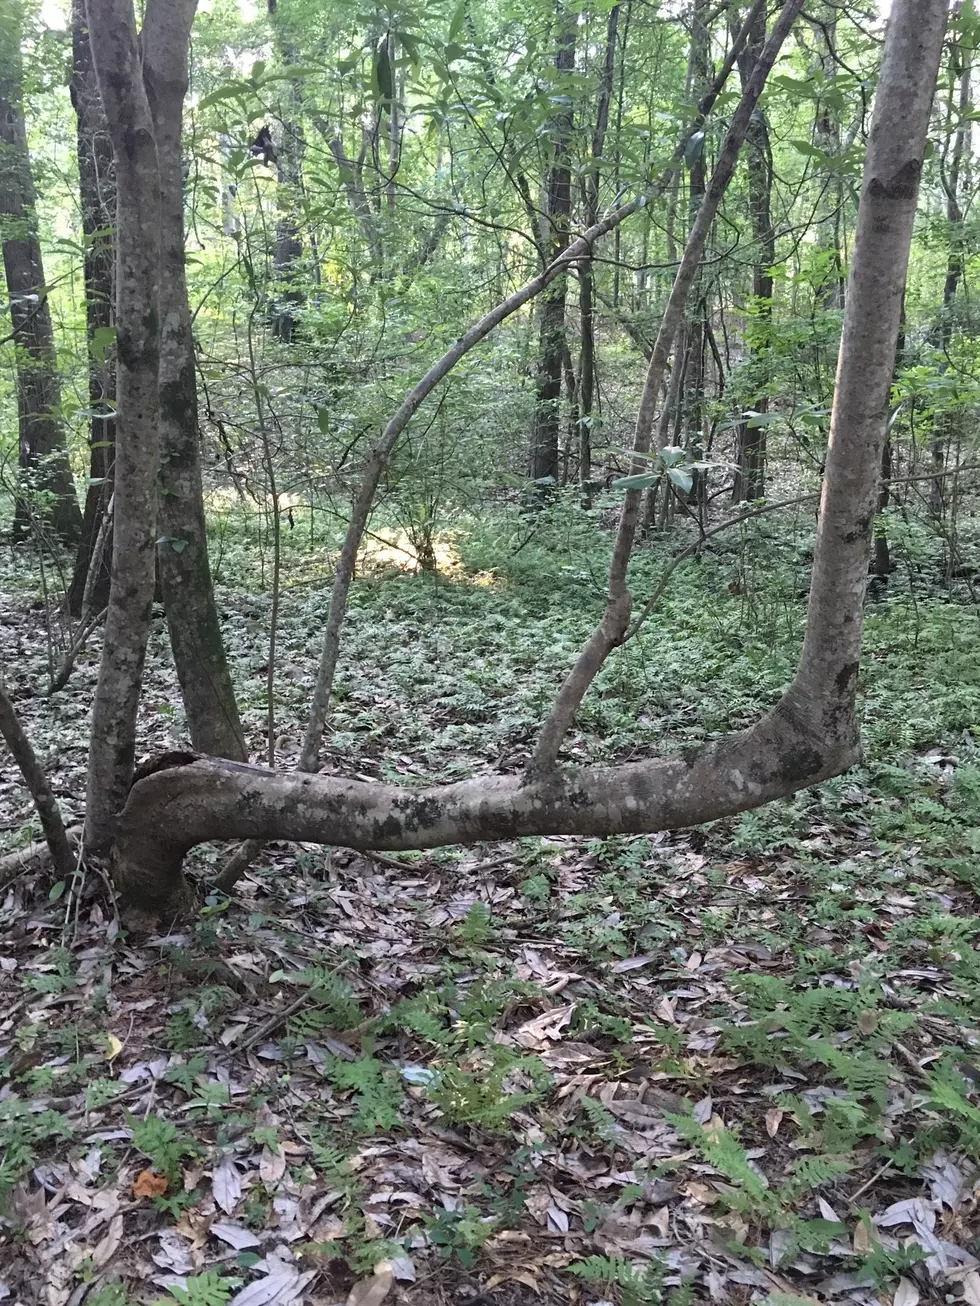 Trail Trees Discovered In Northport Beside Old Creek Bed